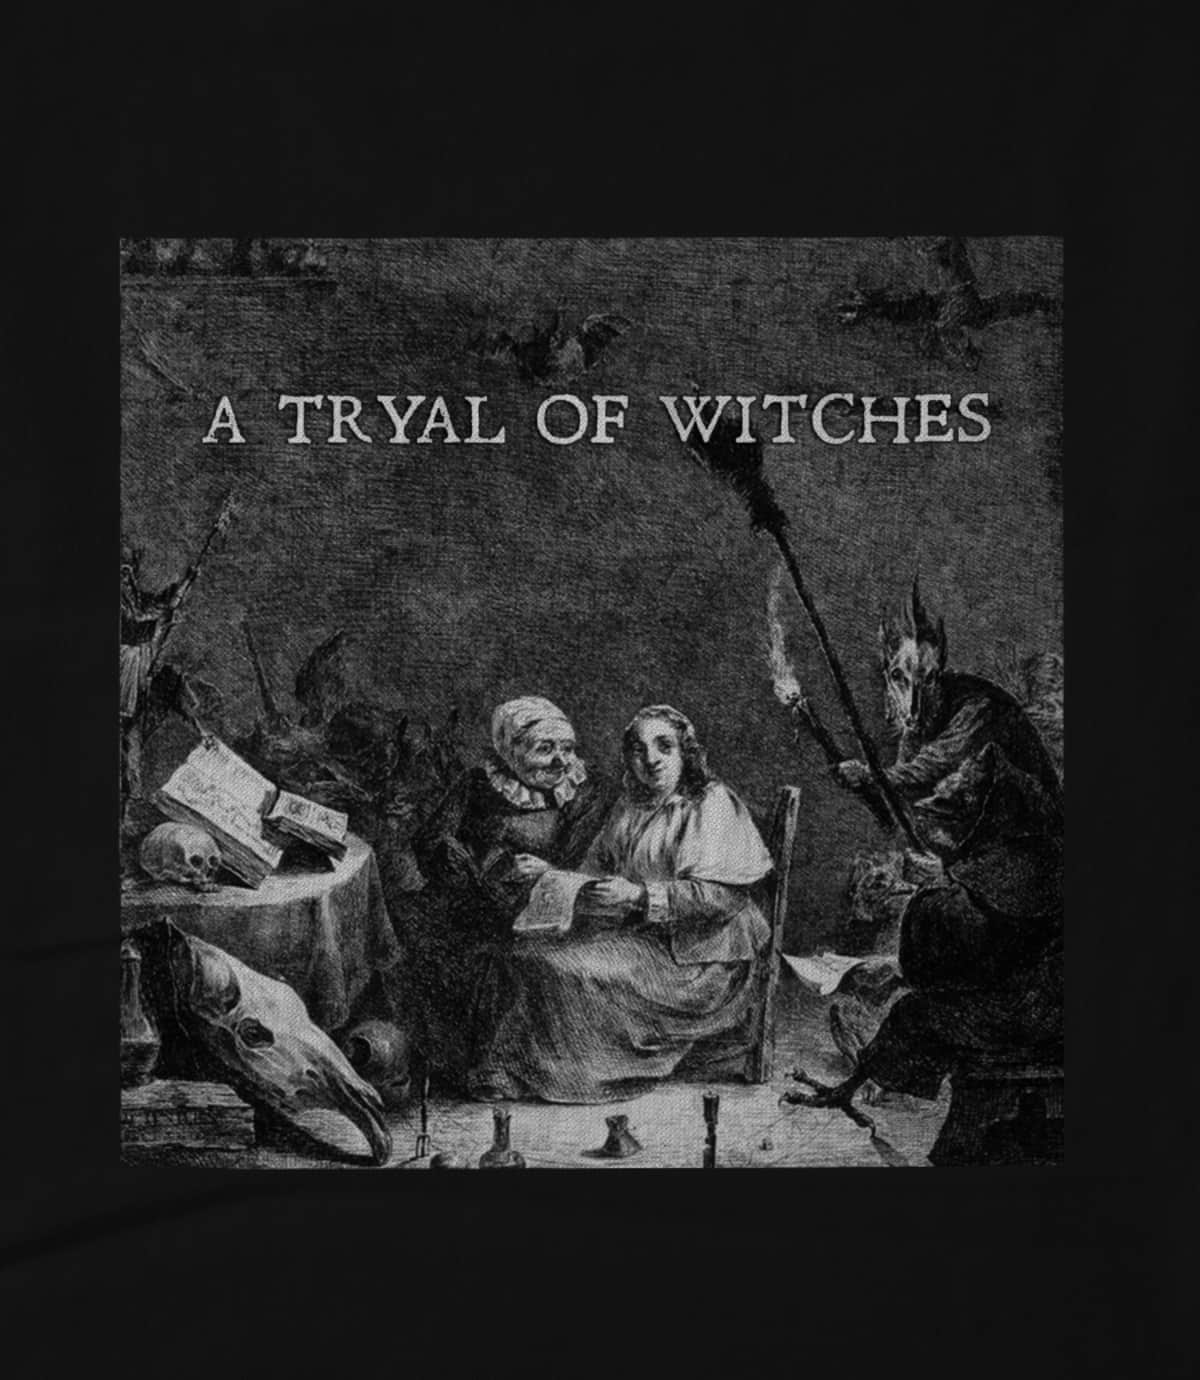 A Tryal of Witches